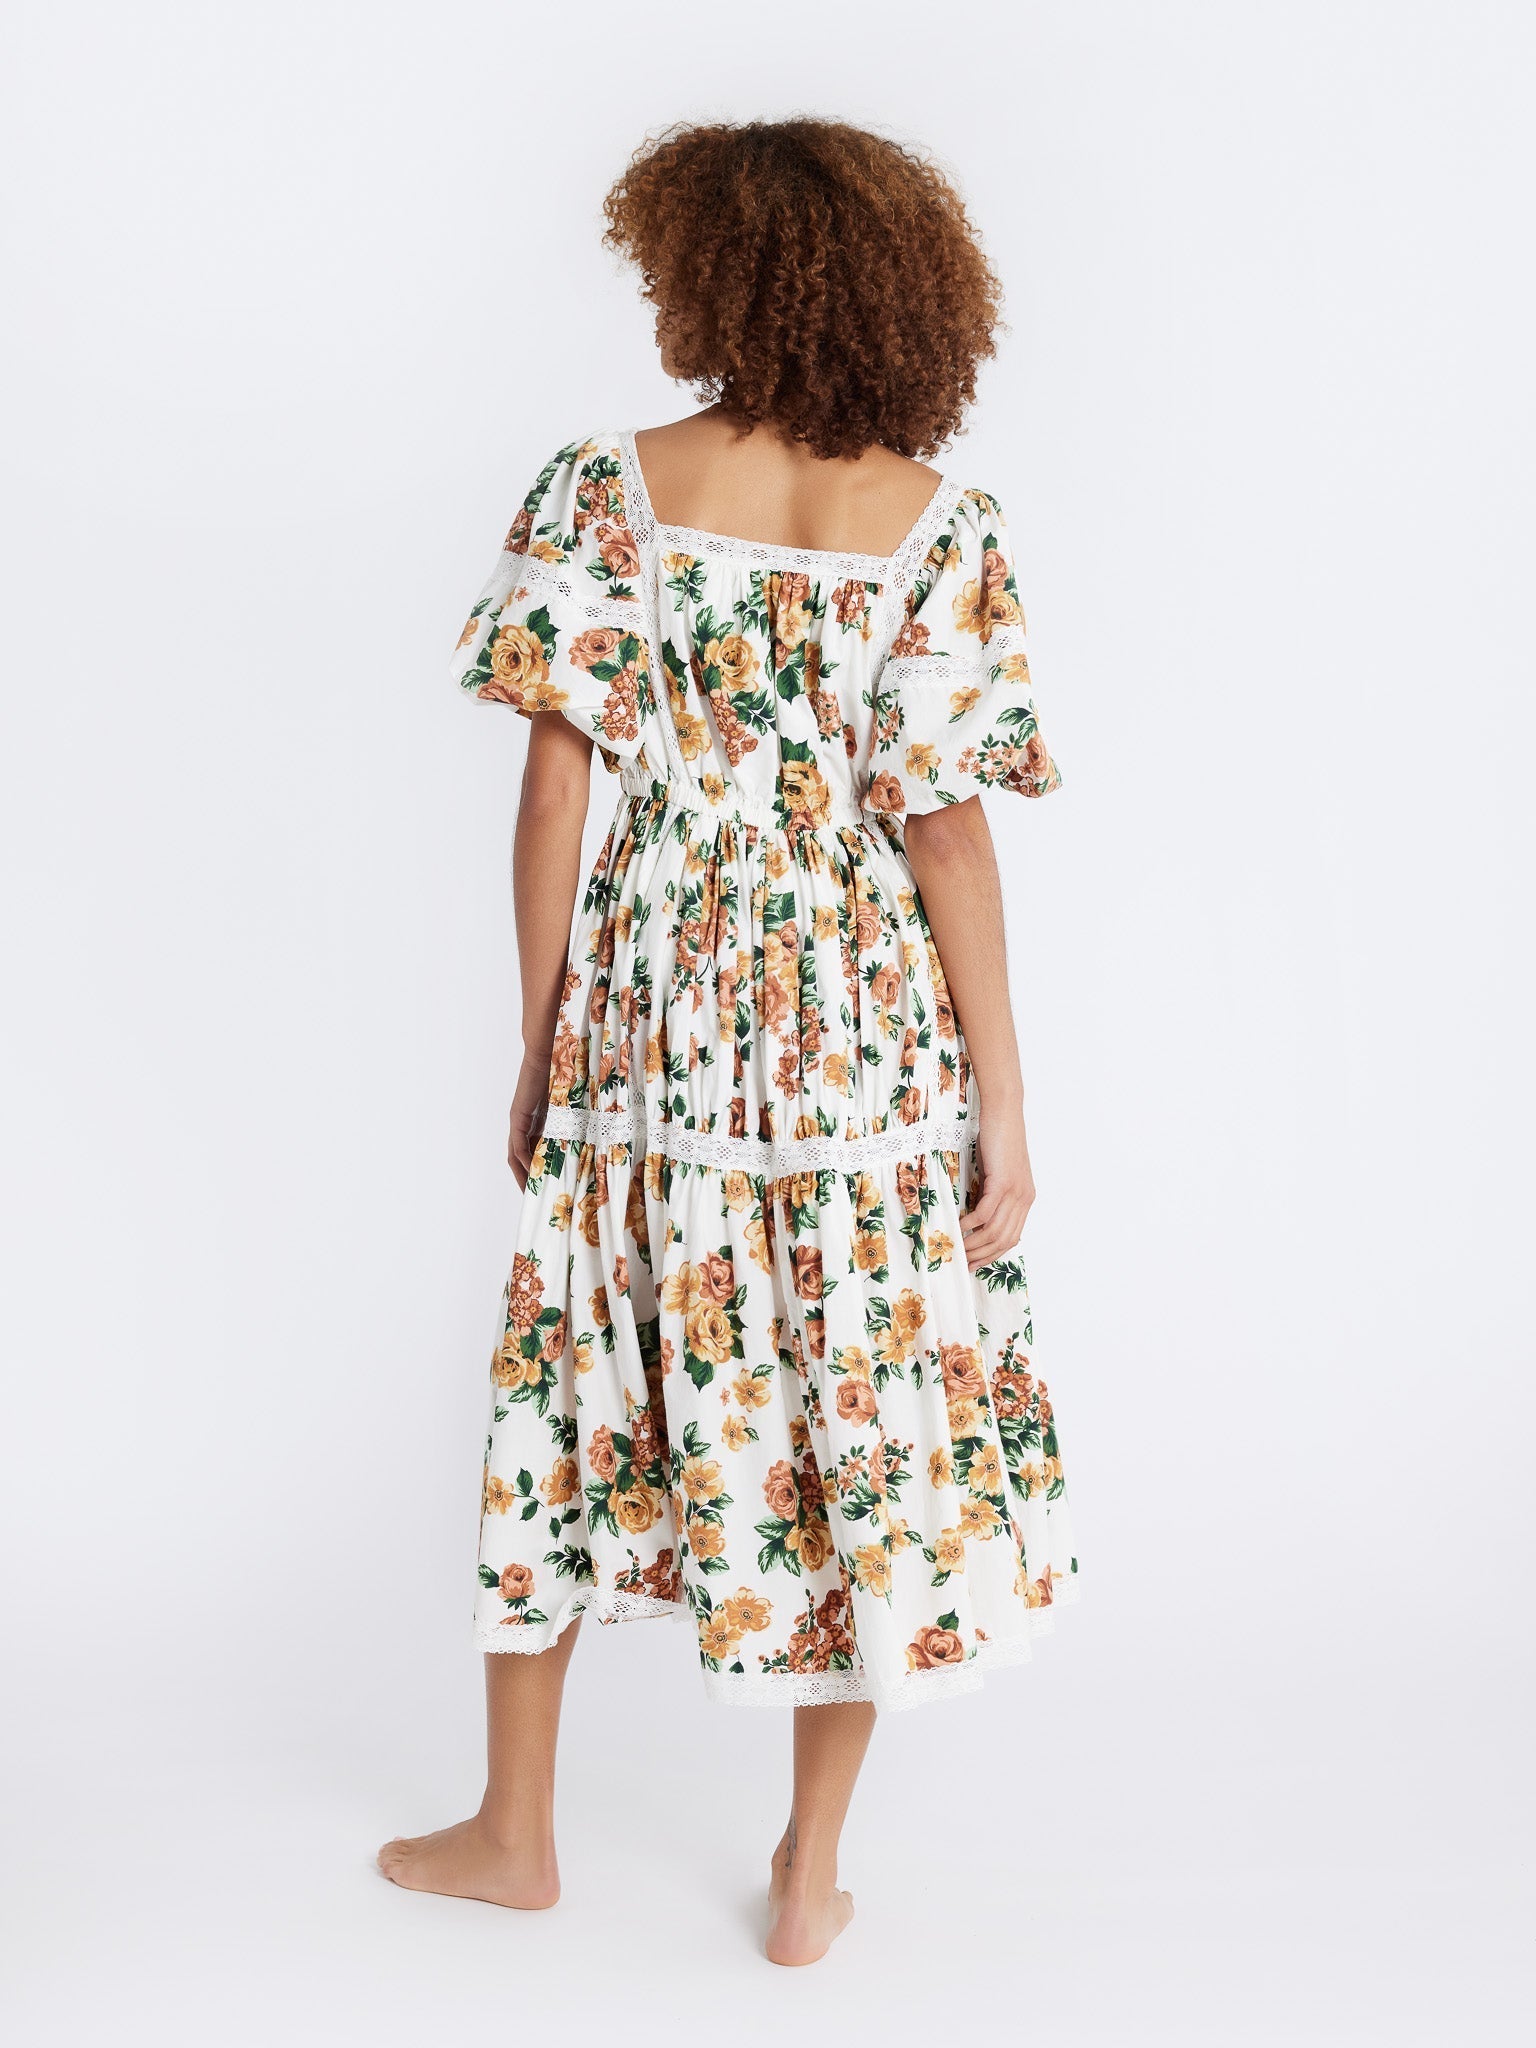 MILLE Clothing Talitha Dress in Antique Rose Floral